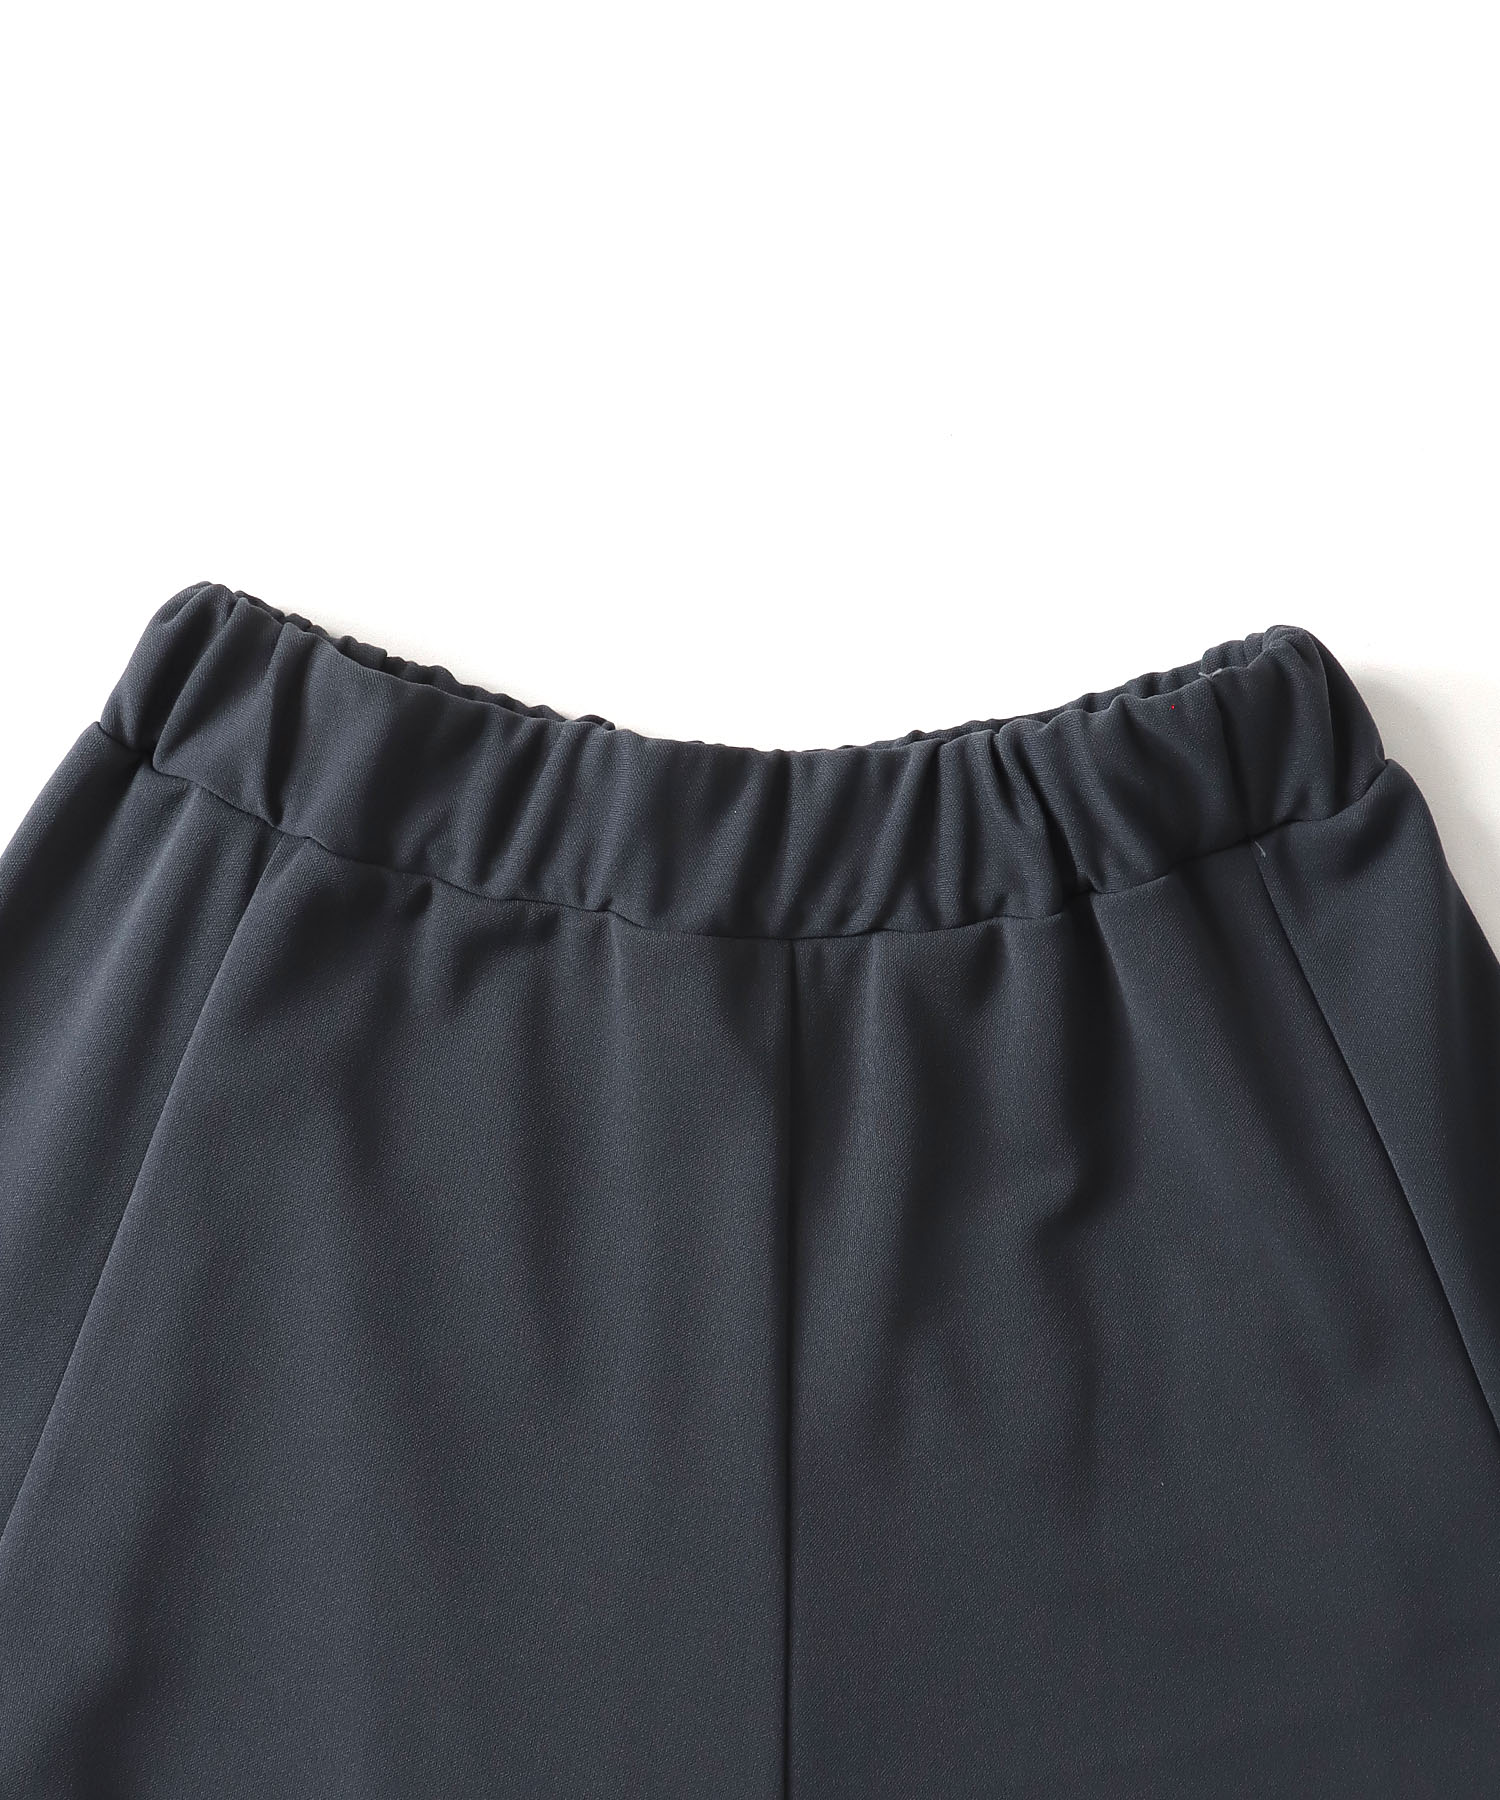 Sugar Rose＞jersey flare skirt | AND ON JIONE STORE（アンドオン